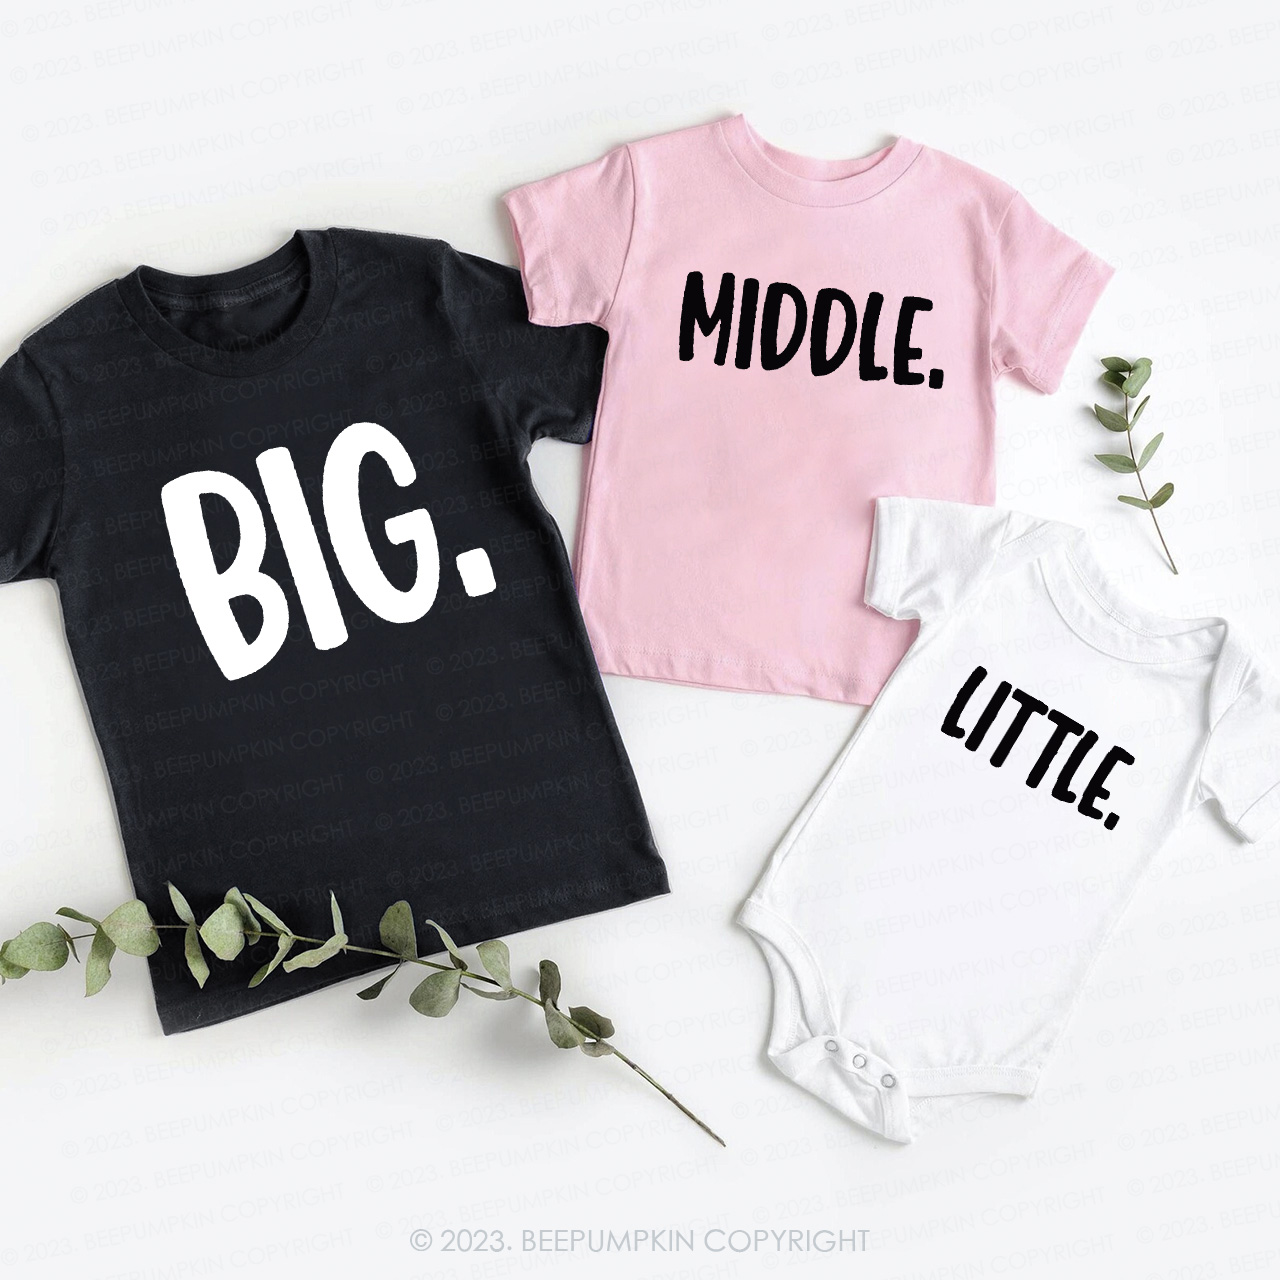 Big. Middle. Little. Matching Sibling T-Shirts